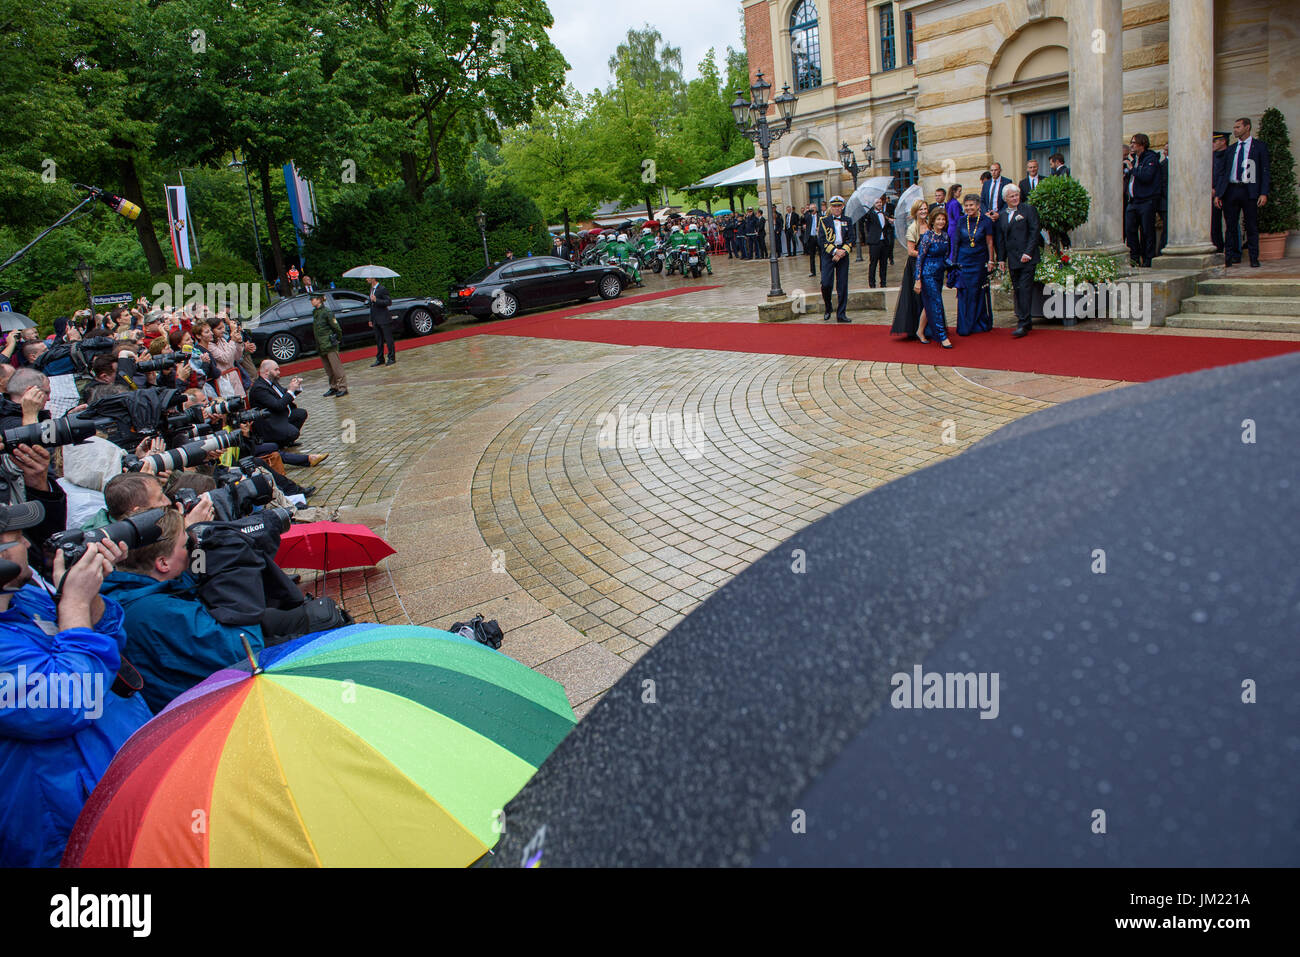 Bayreuth, Germany. 25th July, 2017. Queen Silvia of Sweden (blue dress), and the wife of Bavarian premier Seehofer, Karin Seehofer, are greeted by mayoress of Bayreuth Brigitte Merk-Erbe and her husband Thomas Erbe at the opening of the Bayreuth Festival 2017 in Bayreuth, Germany, 25 July 2017. The festival opens with the opera 'Die Meistersinger von Nuernberg' (The Master-Singers of Nuremberg). Photo: Nicolas Armer/dpa/Alamy Live News Stock Photo